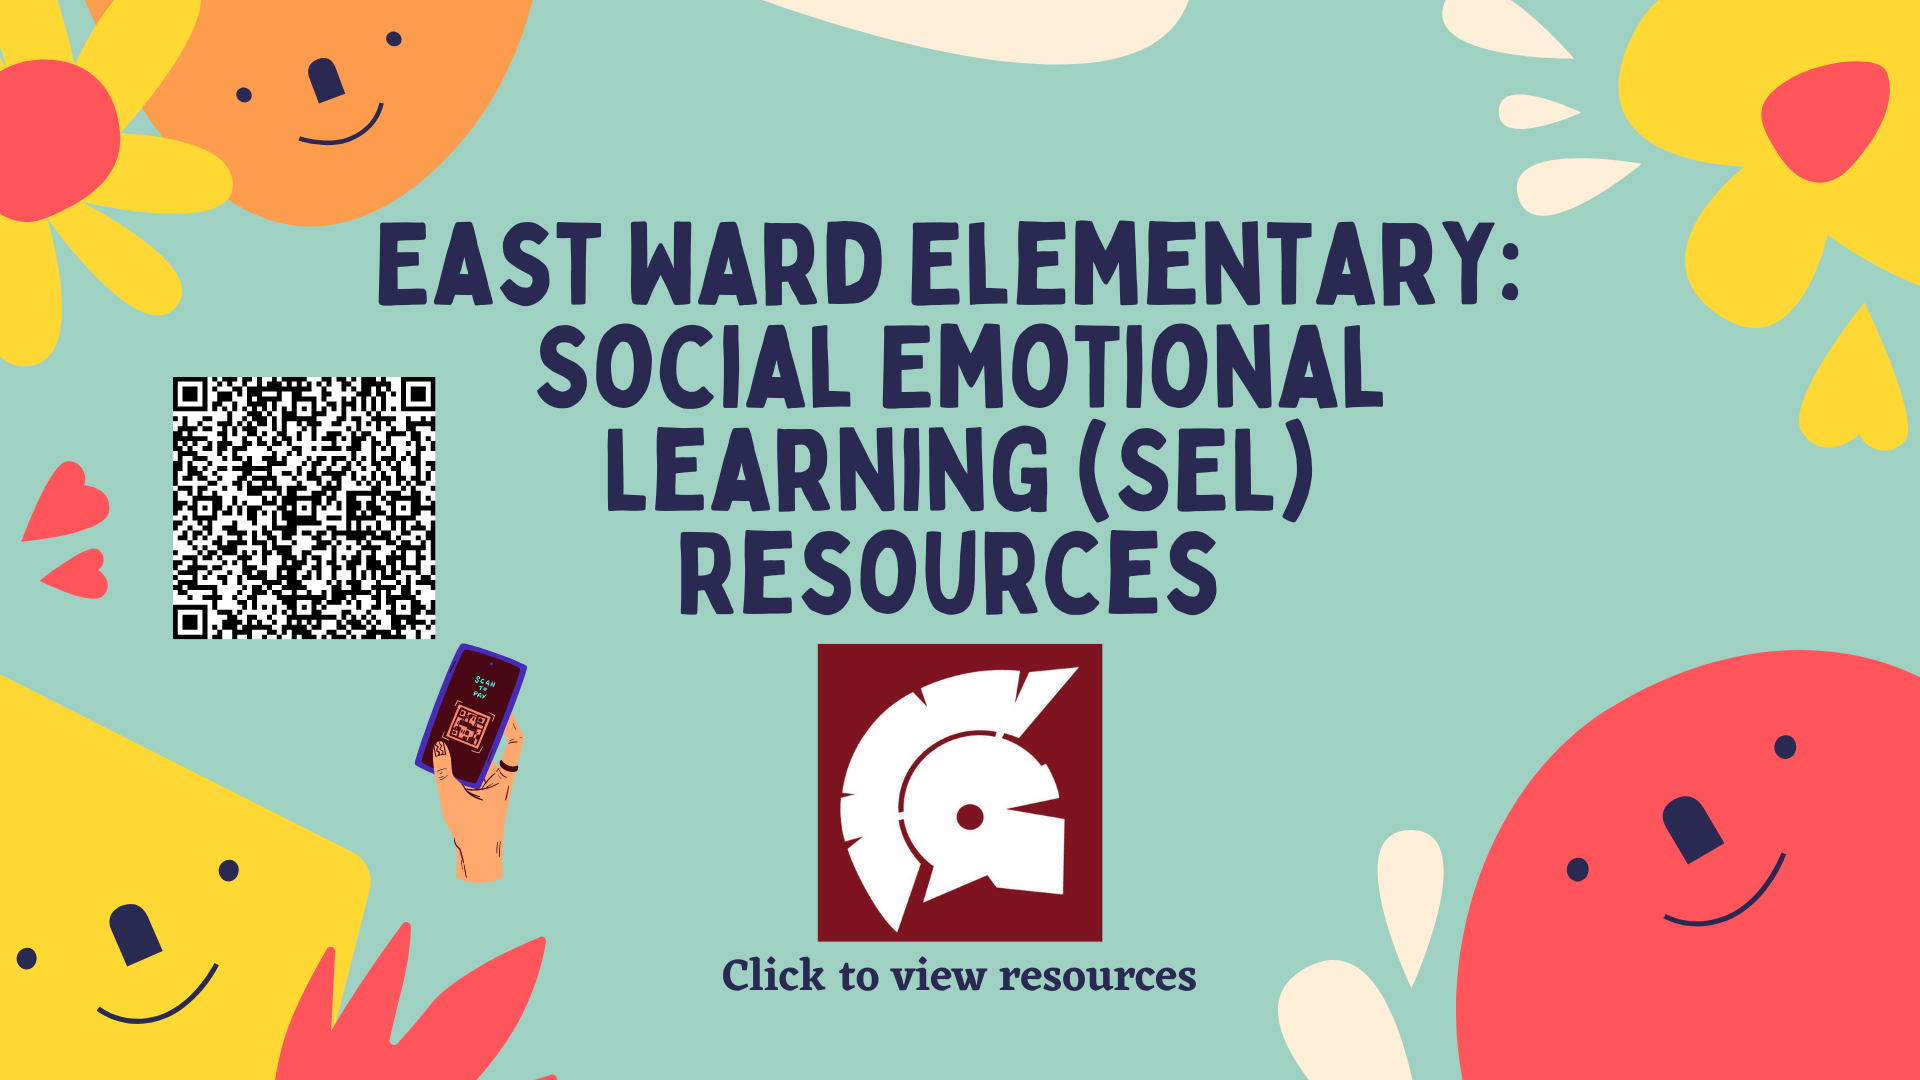 East Ward Elementary Social Emotional Learning (SEL) Resources